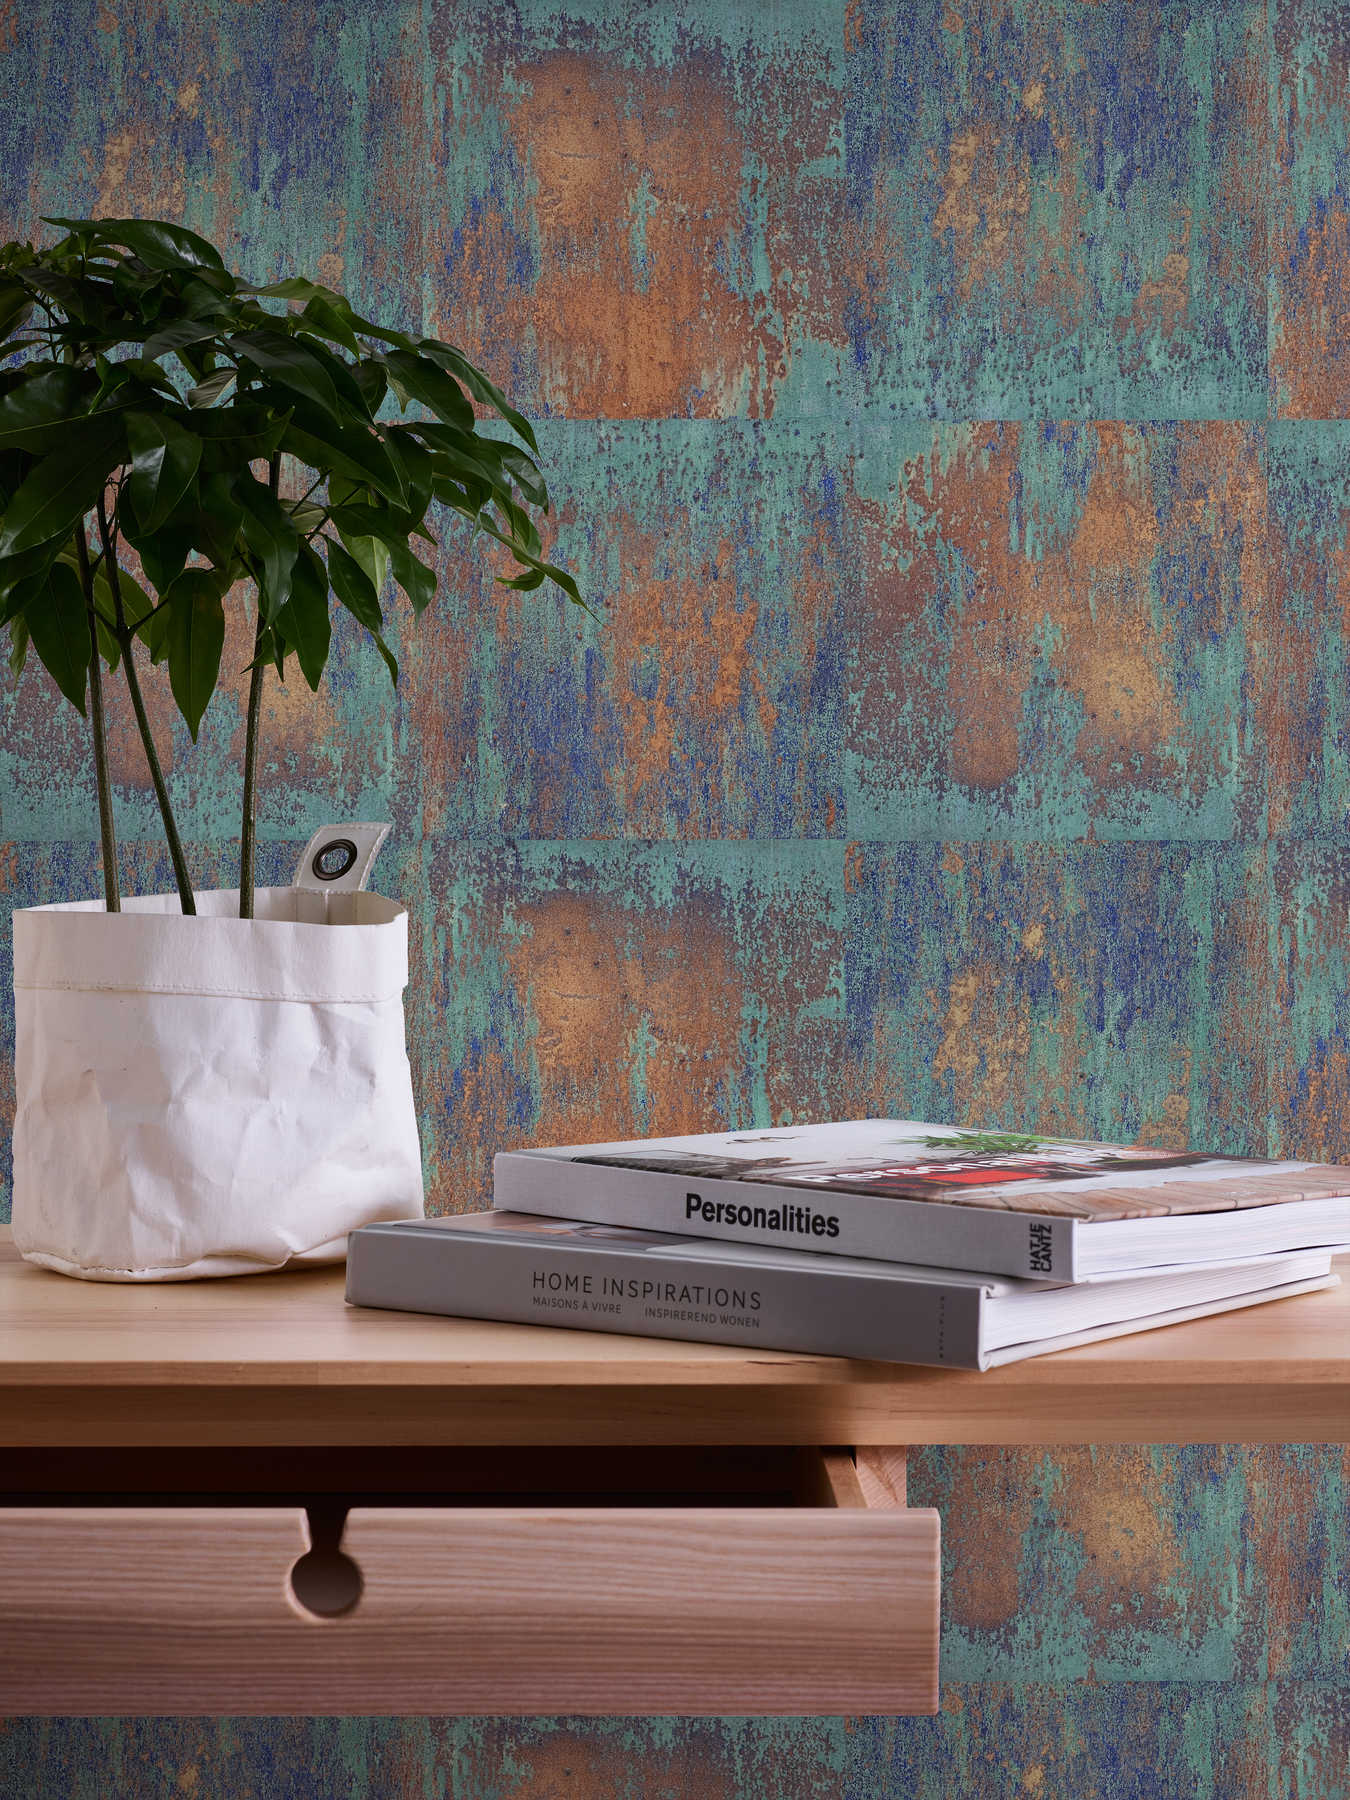             Non-woven wallpaper patina design with rust and copper effects - blue, brown, copper
        